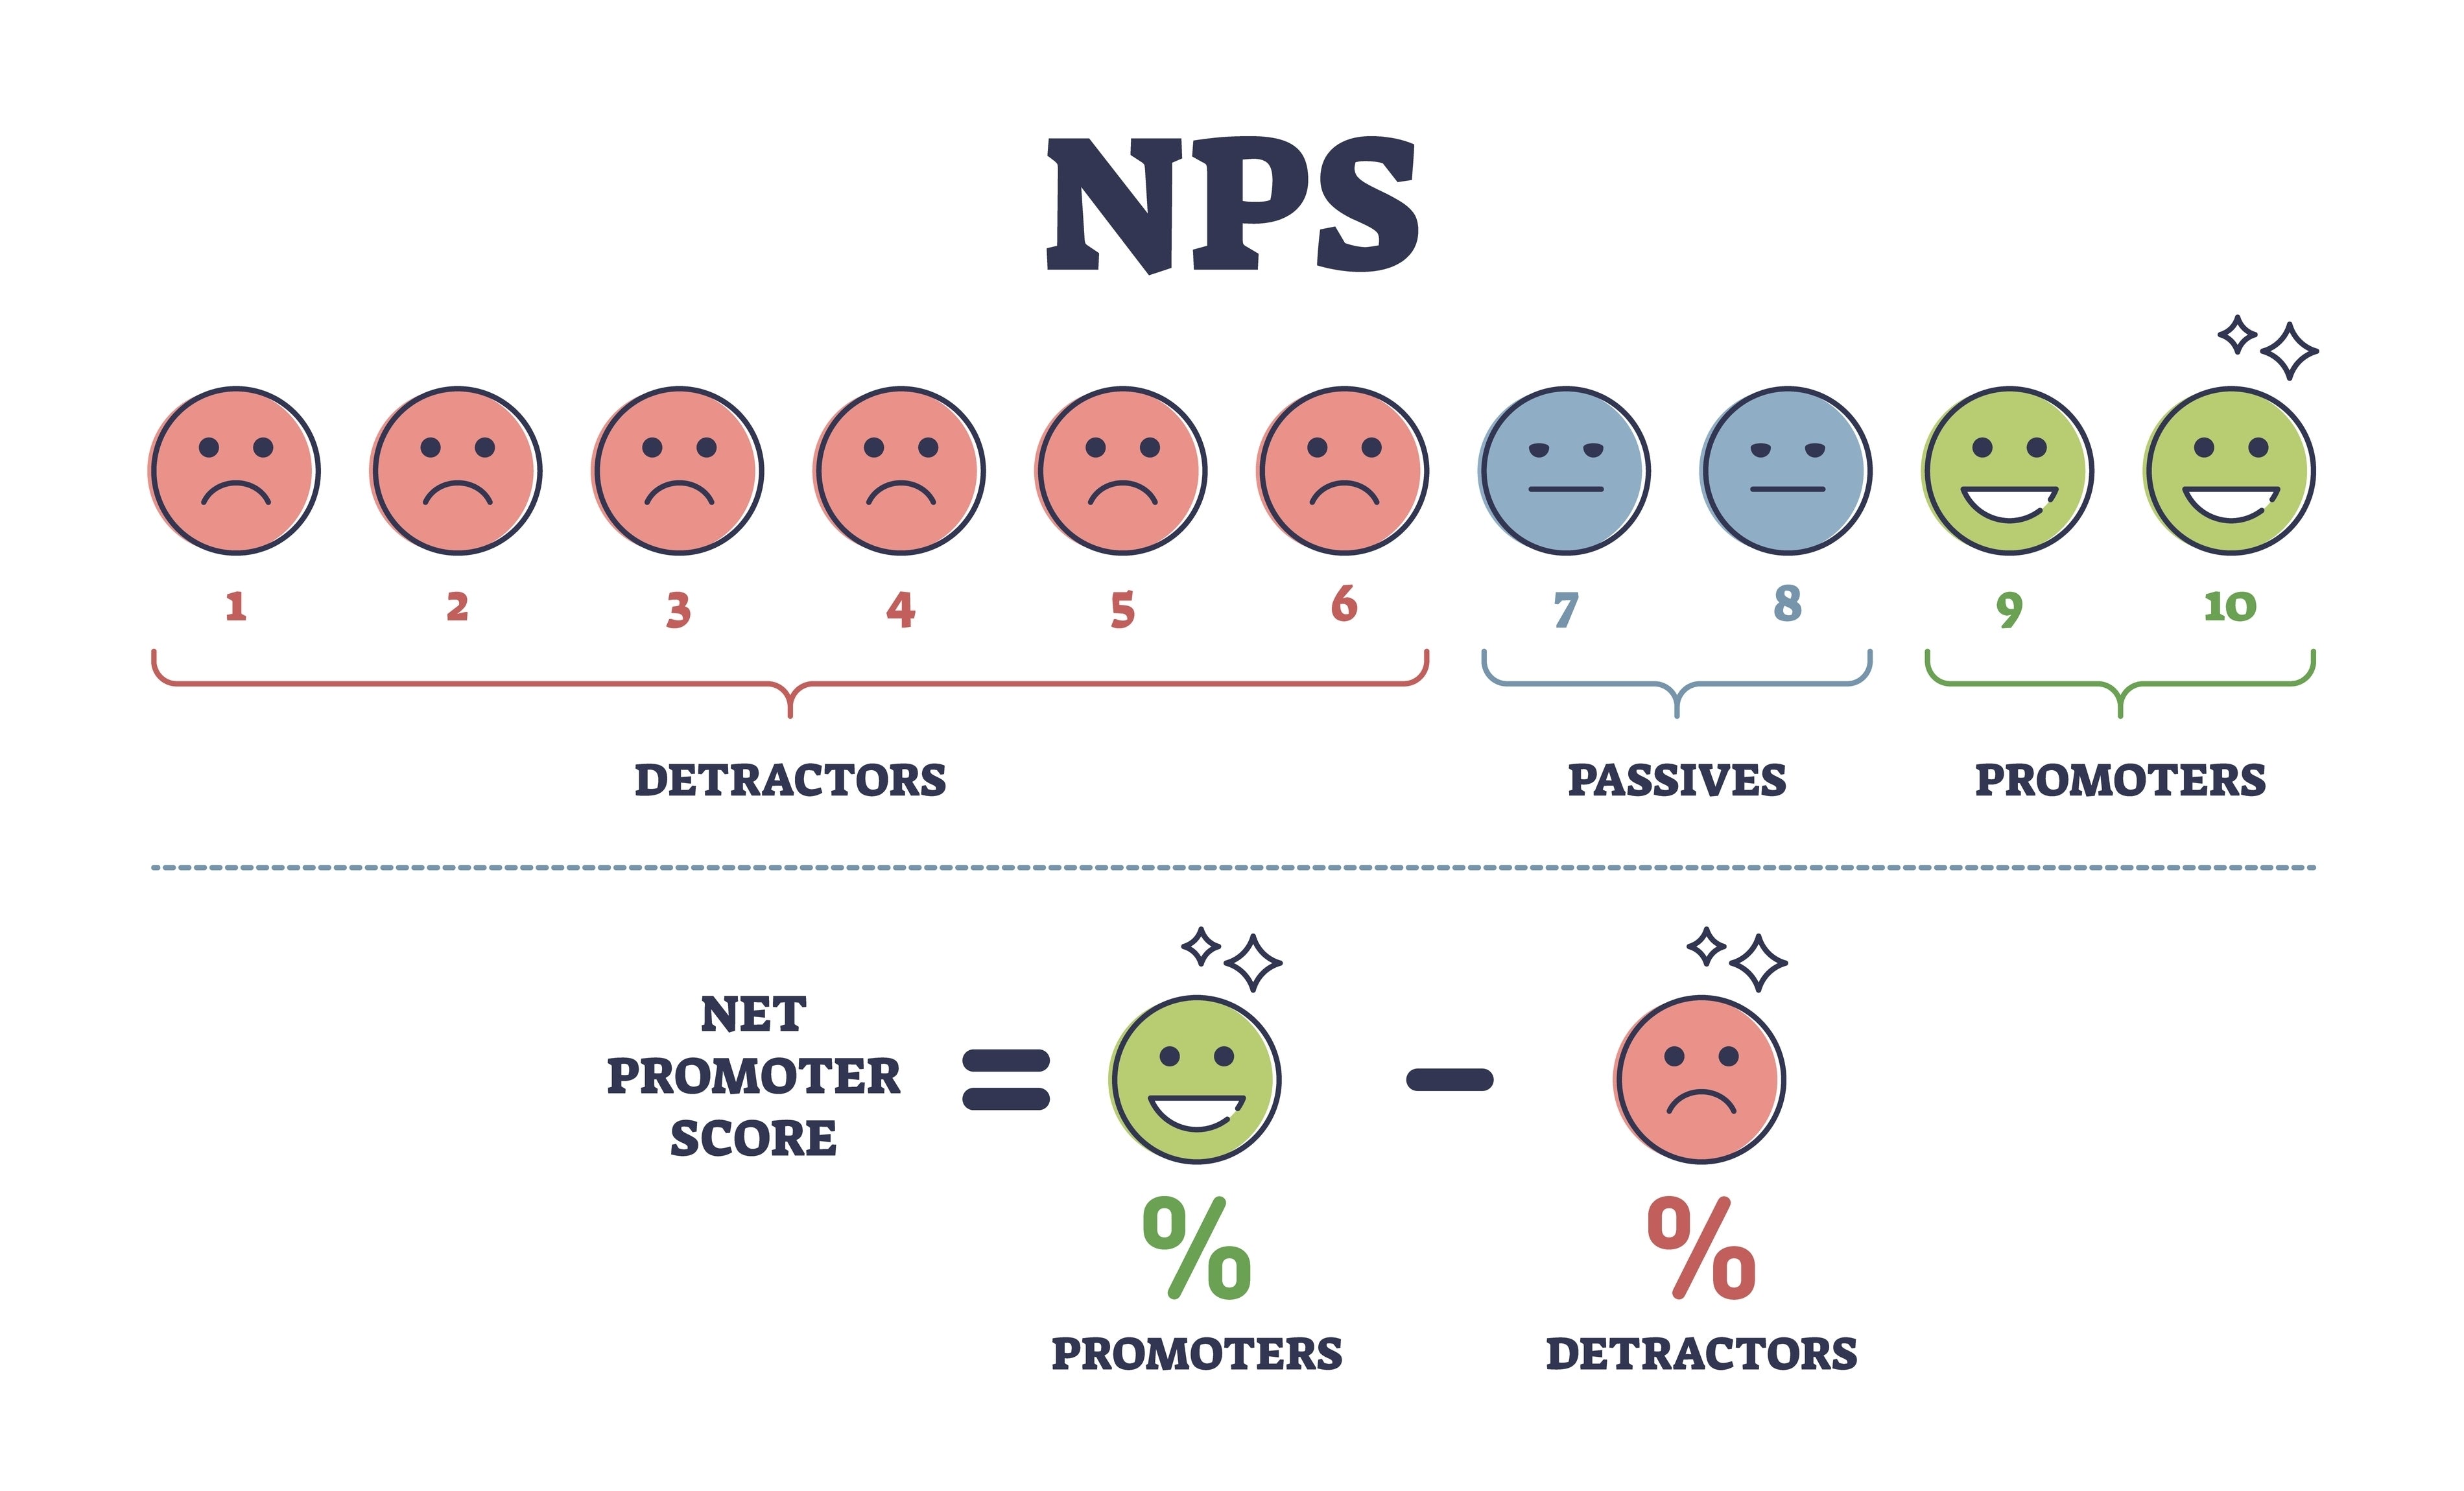 NPS - Net Promoter Score chart using sad face emjois, as detractors, no emotion as passives, and smiles as promoters, with 60% detractors, and the rest split.